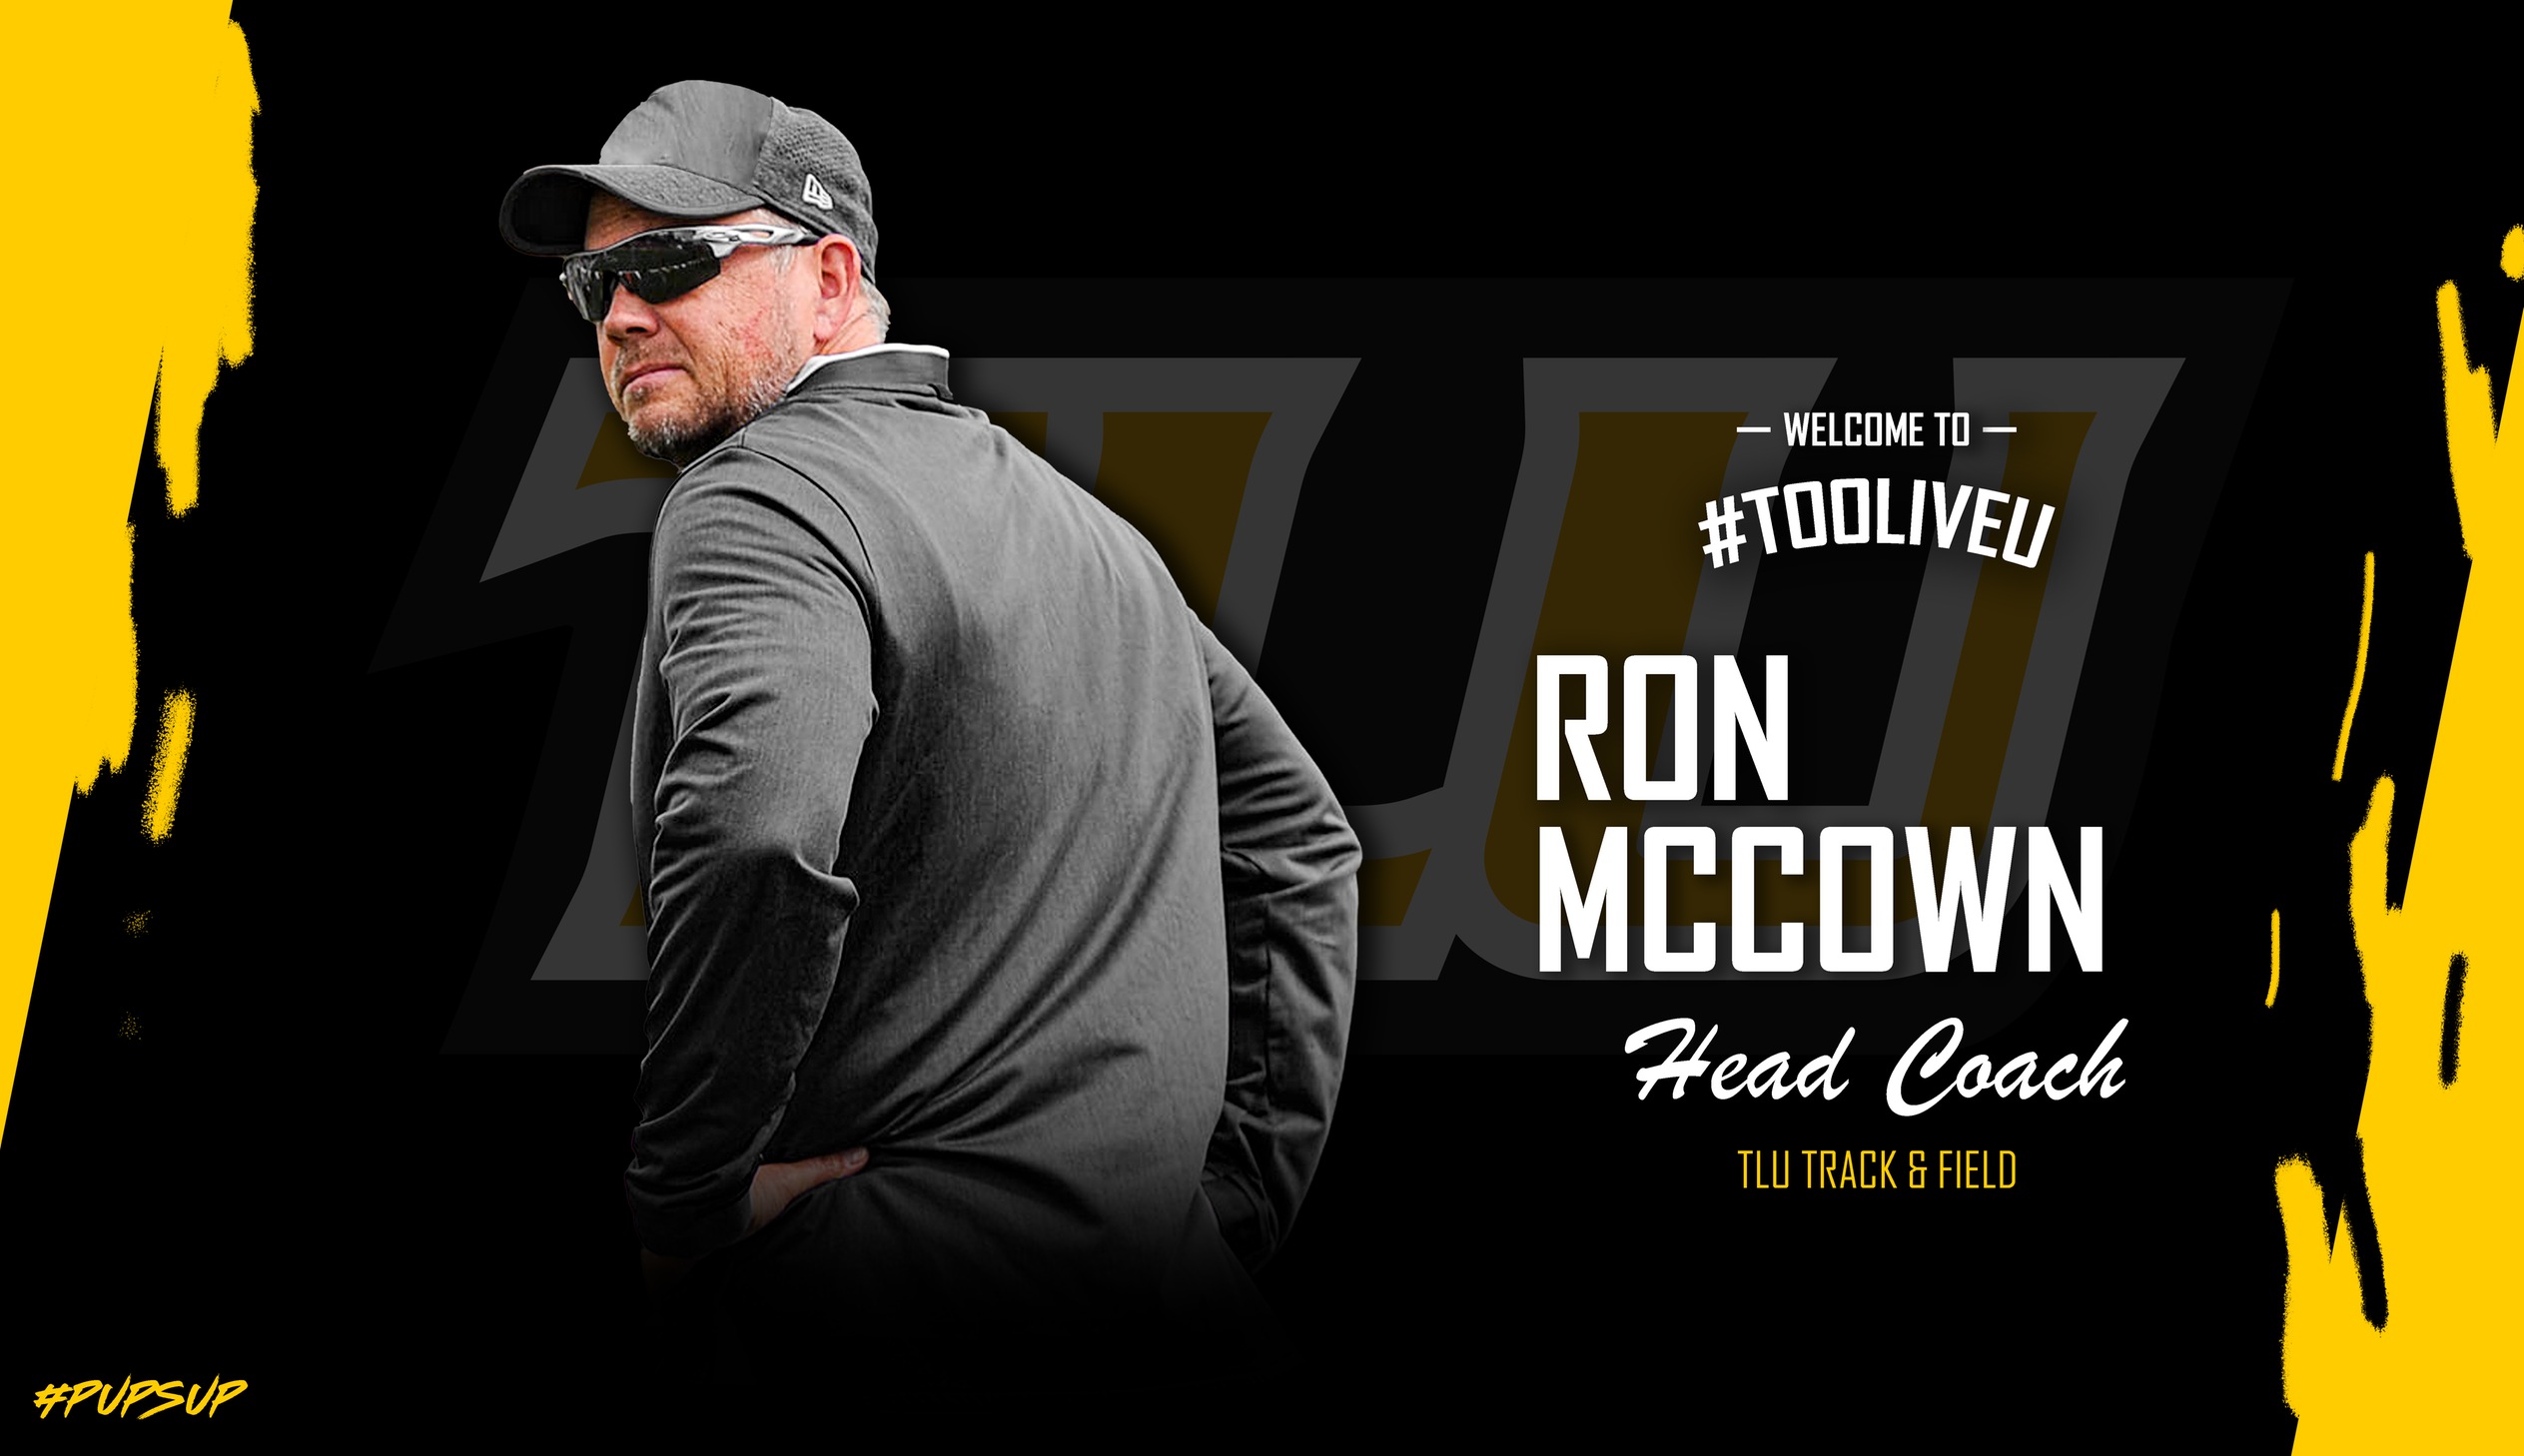 Ron McCown Appointed to Lead Texas Lutheran Track & Field Program